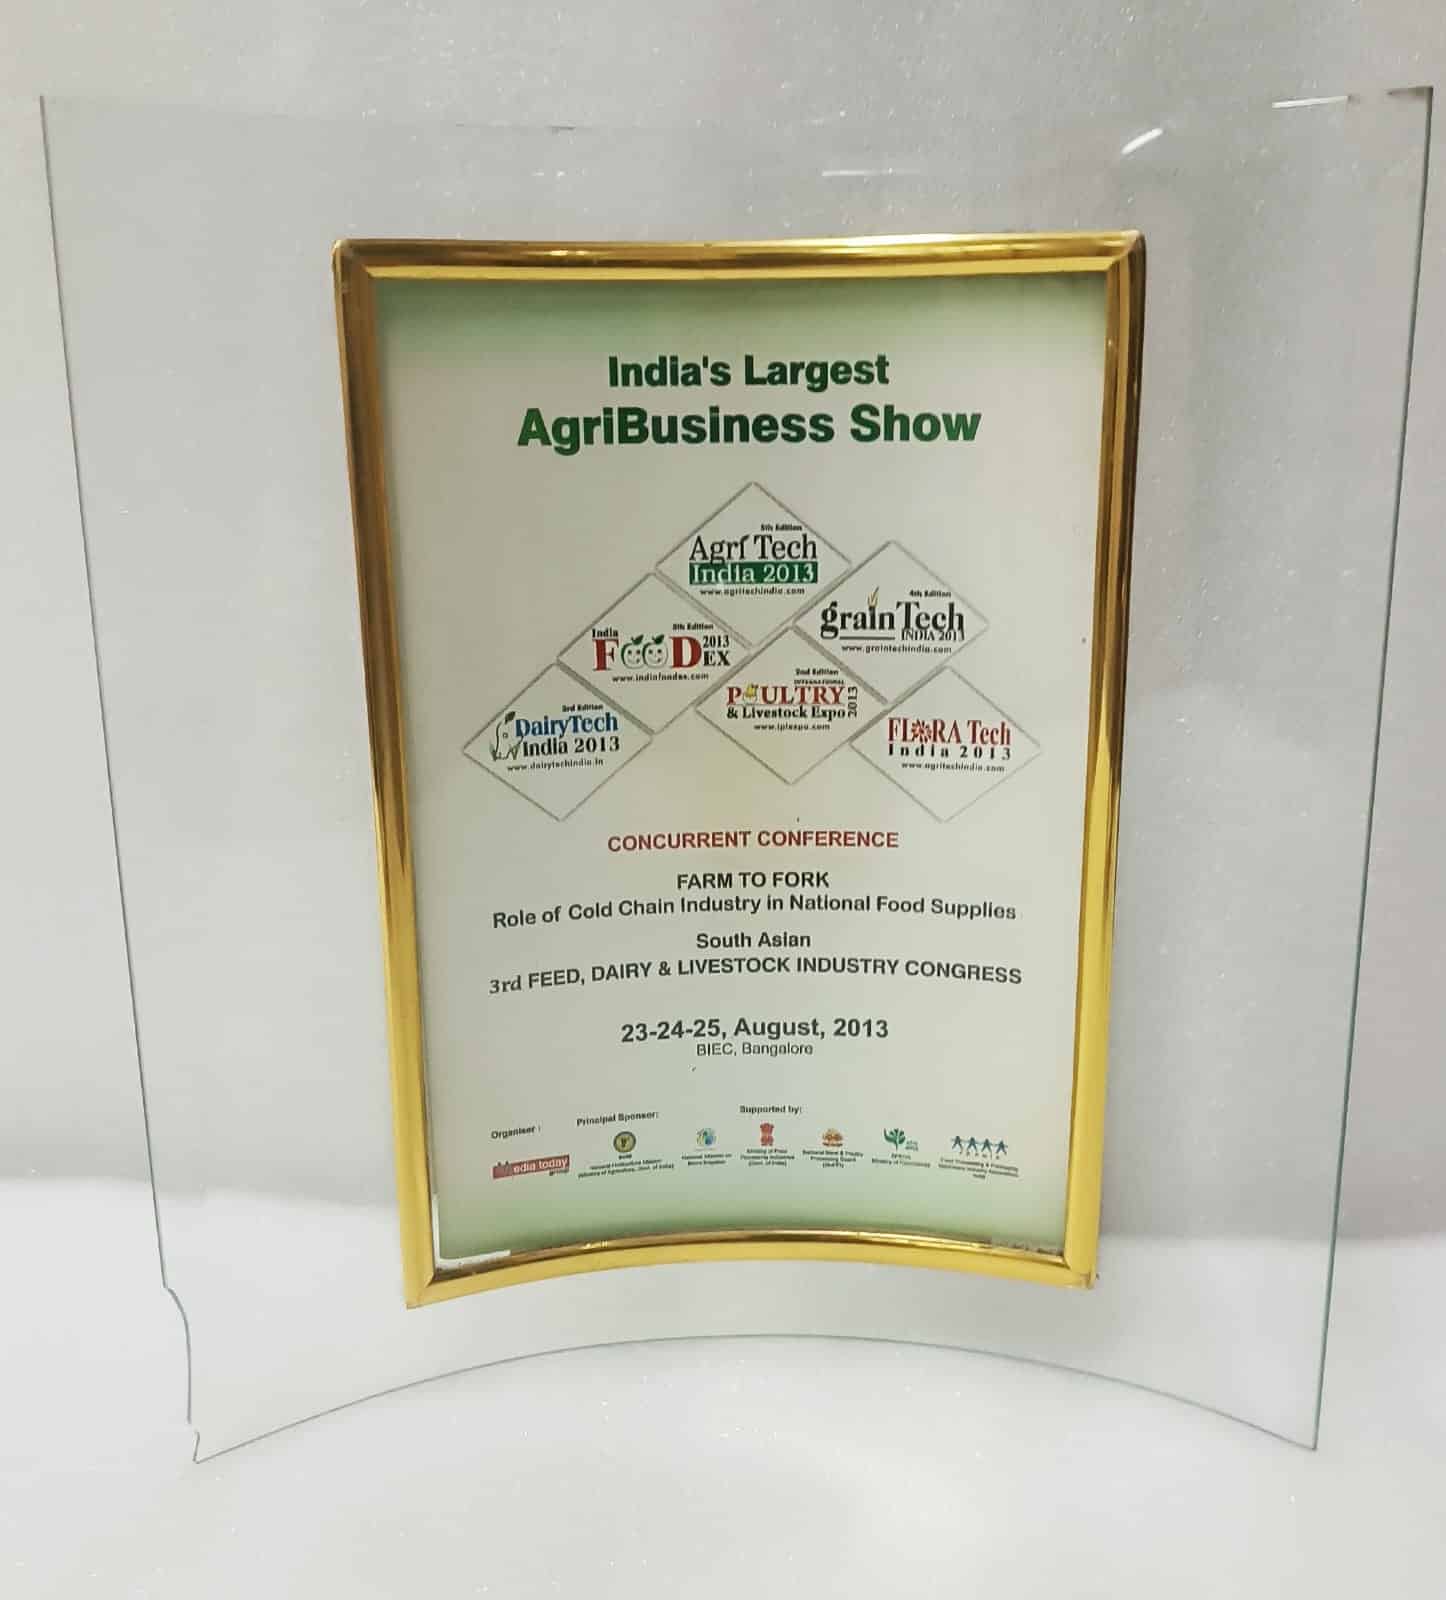 AgriBusiness Show